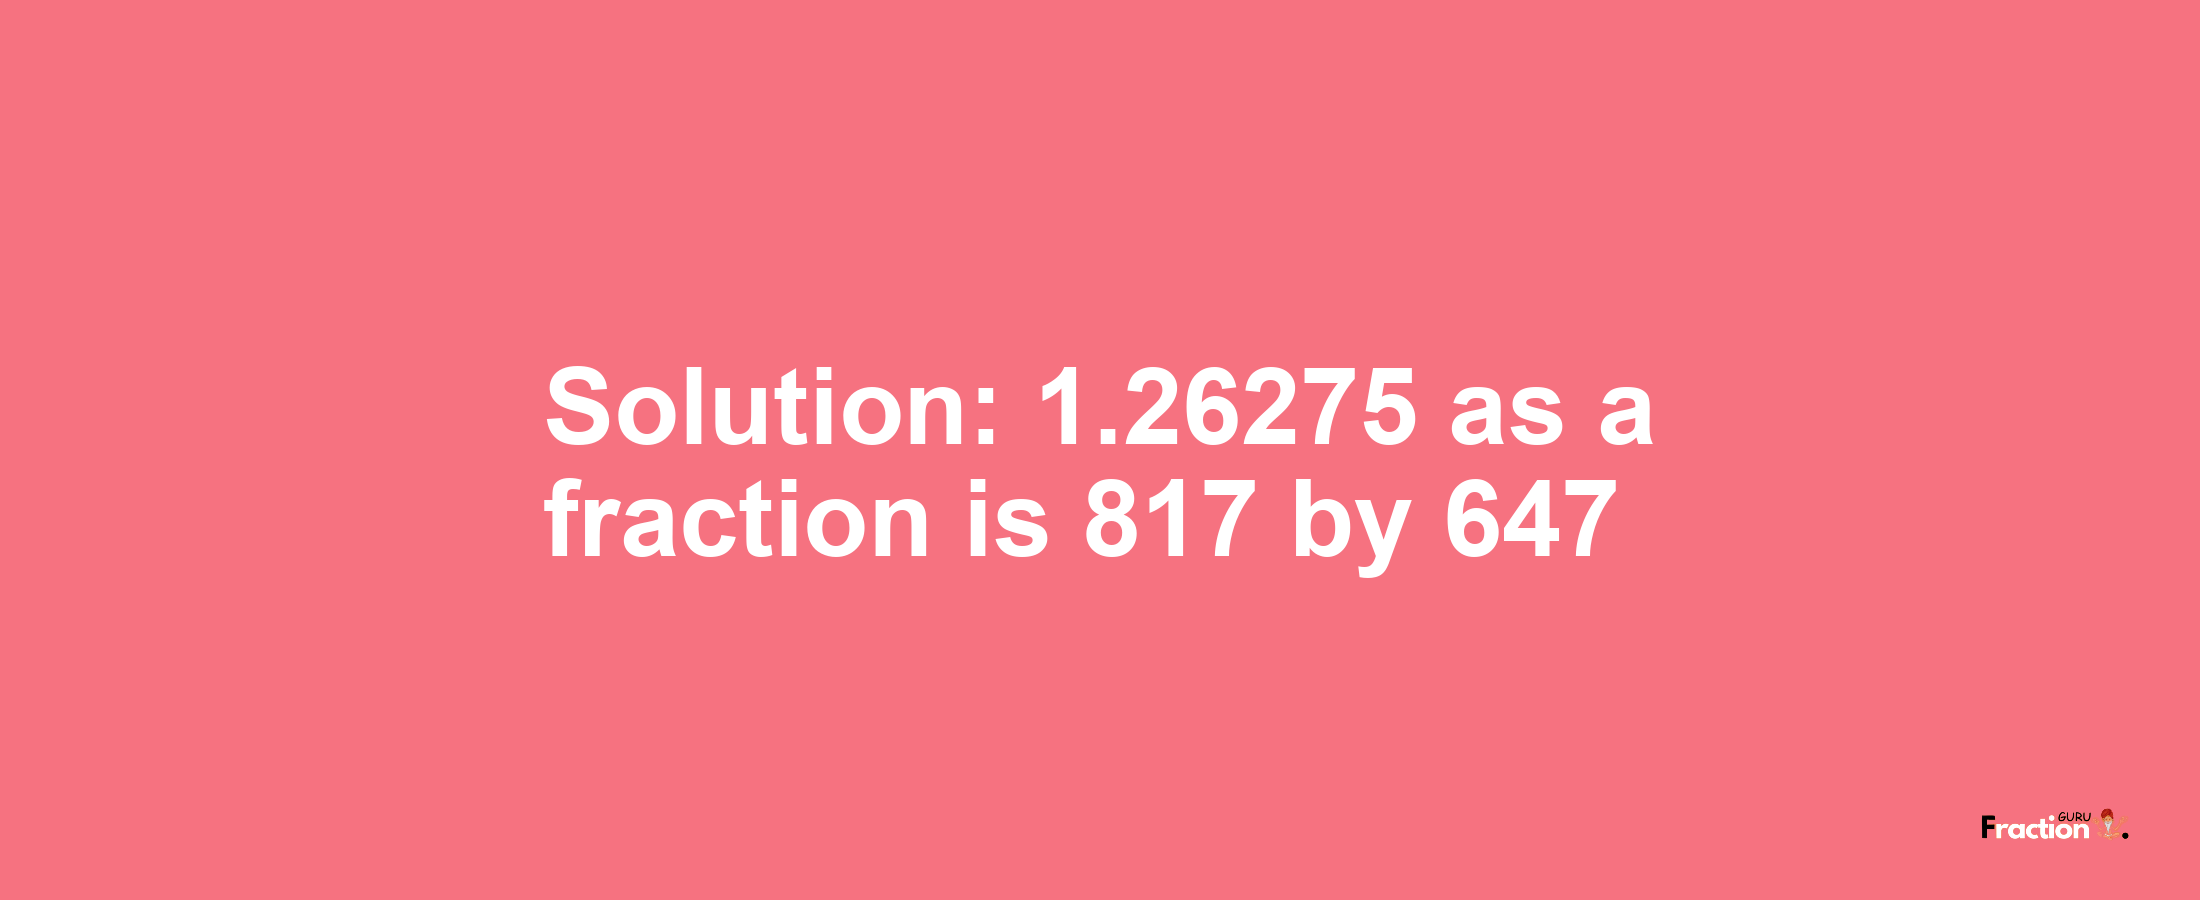 Solution:1.26275 as a fraction is 817/647